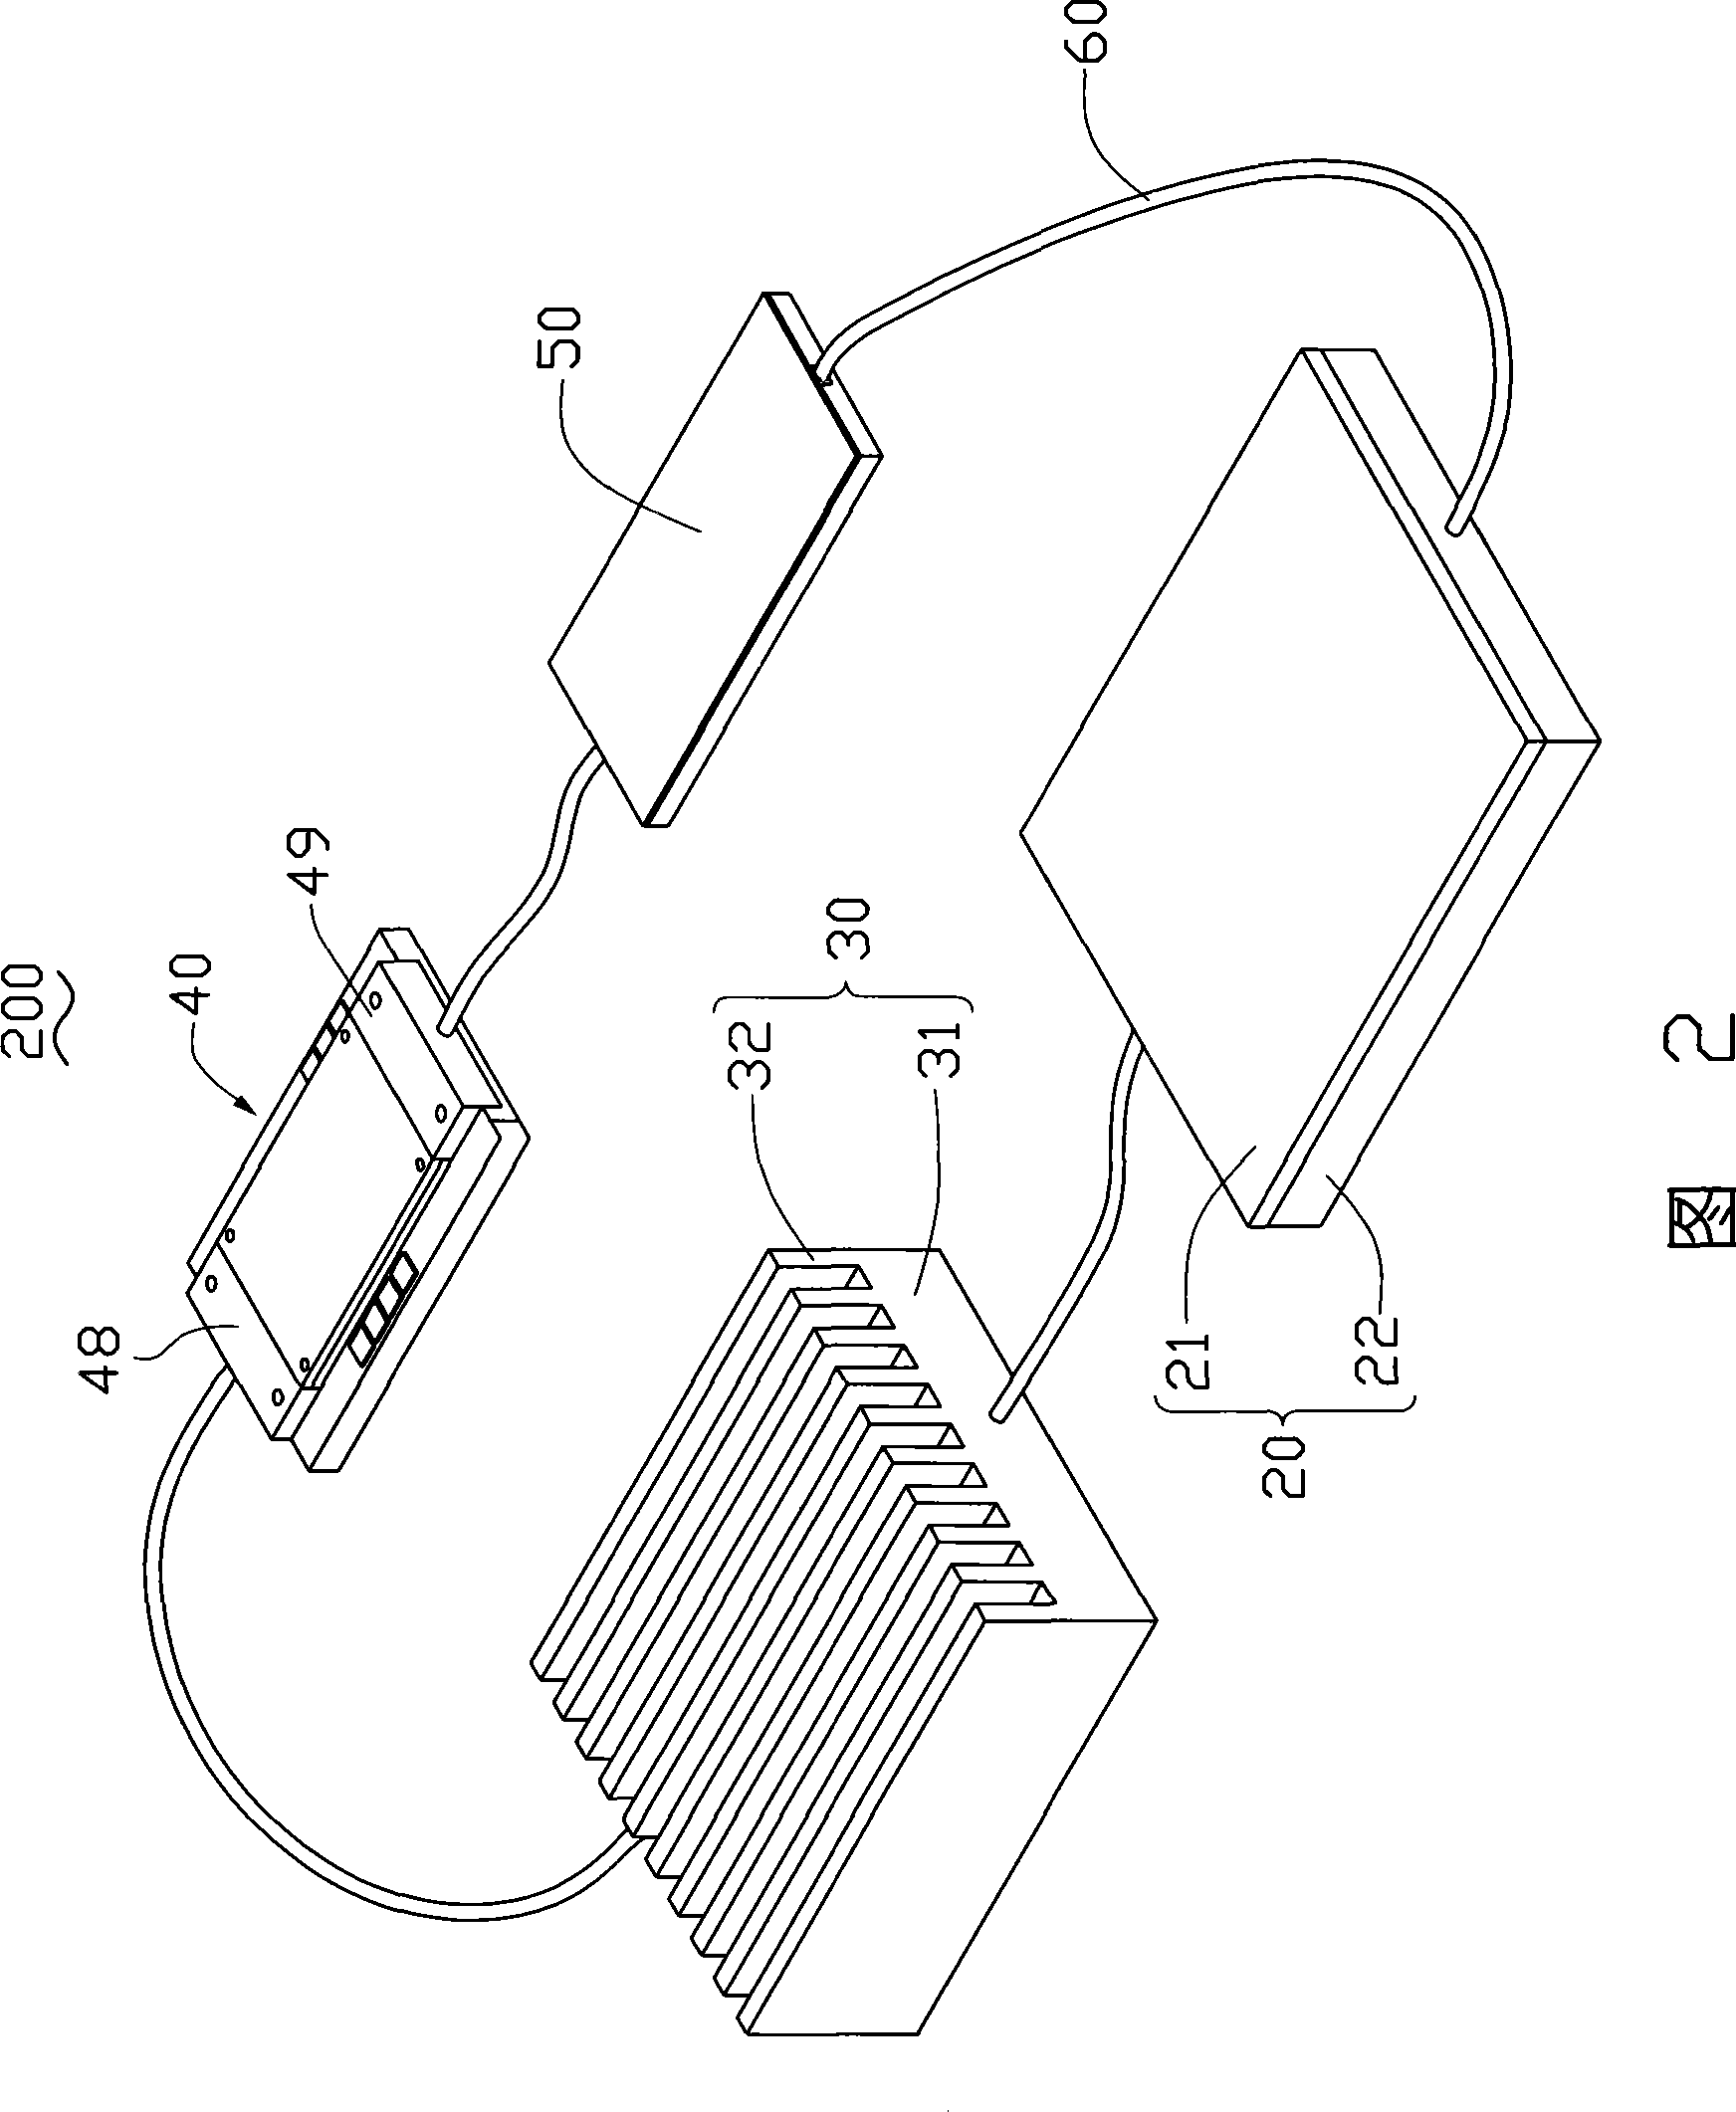 Miniature fluid cooling system and miniature fluid driving device